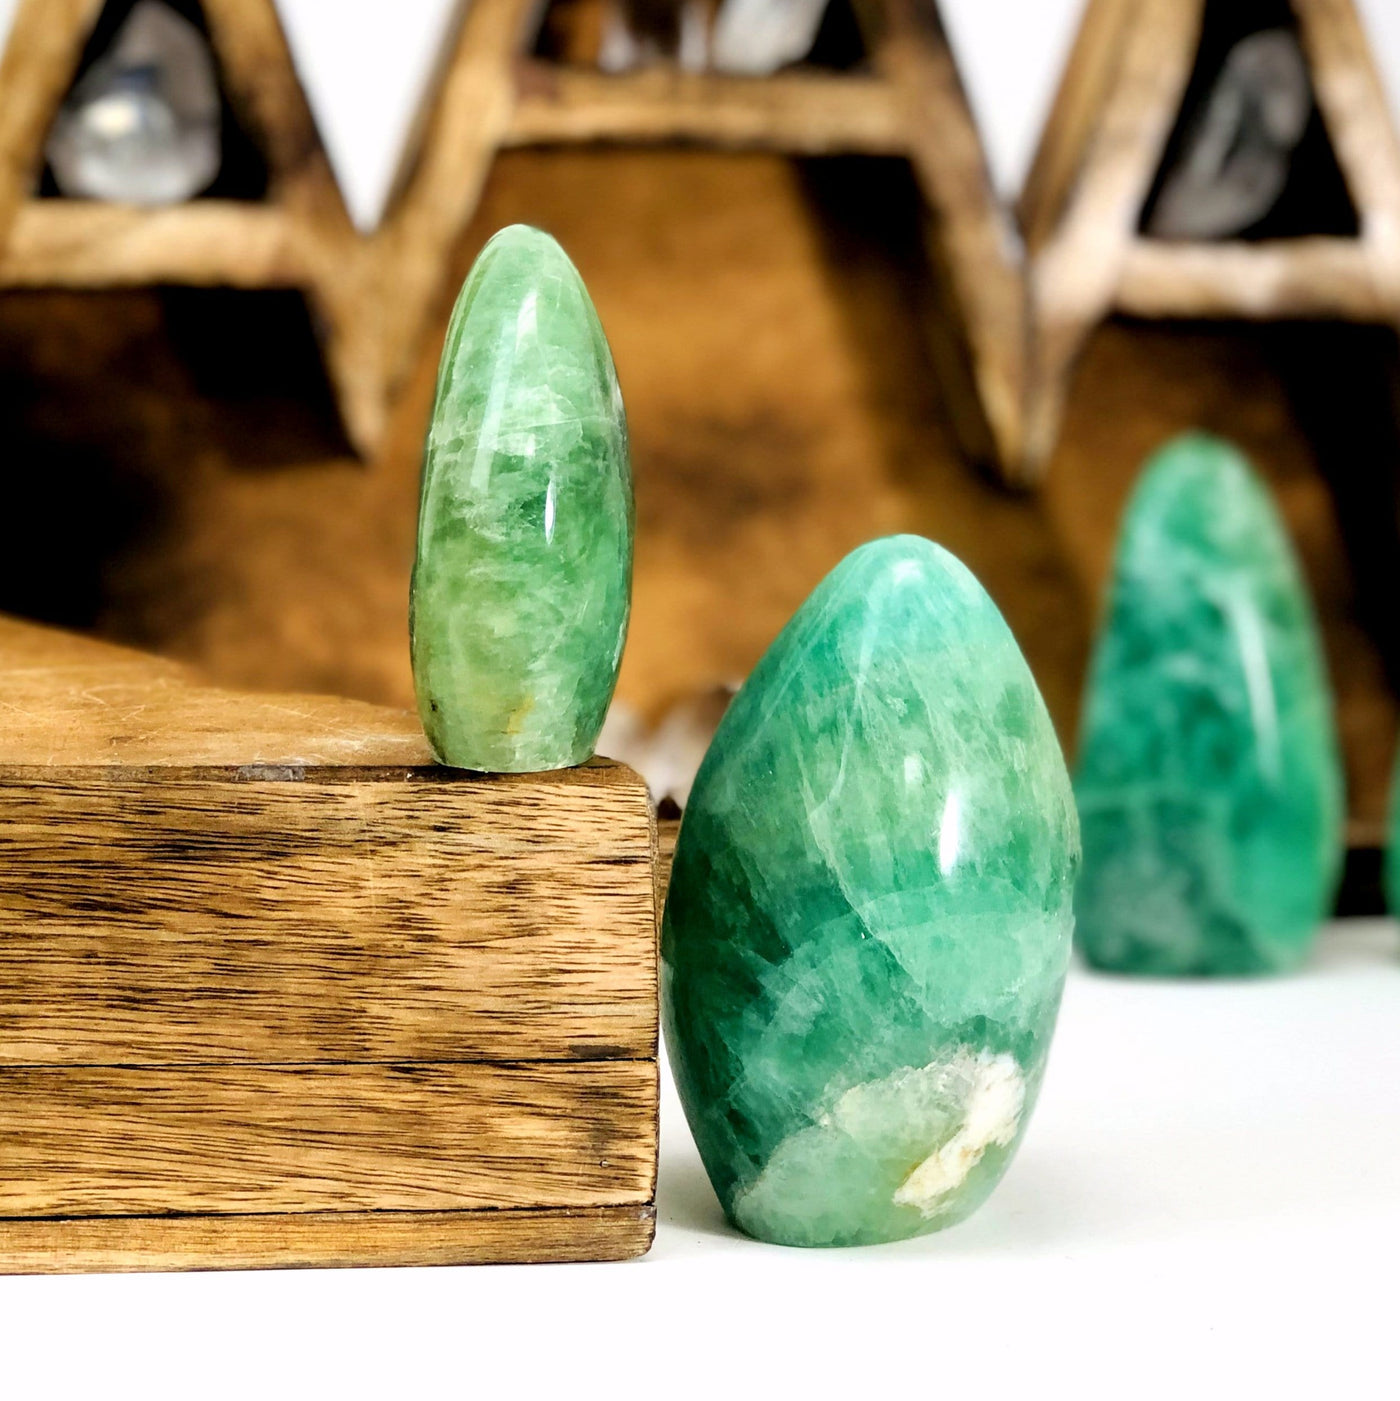 2 Green Fluorite Polished Cut Bases with another blurred in the background